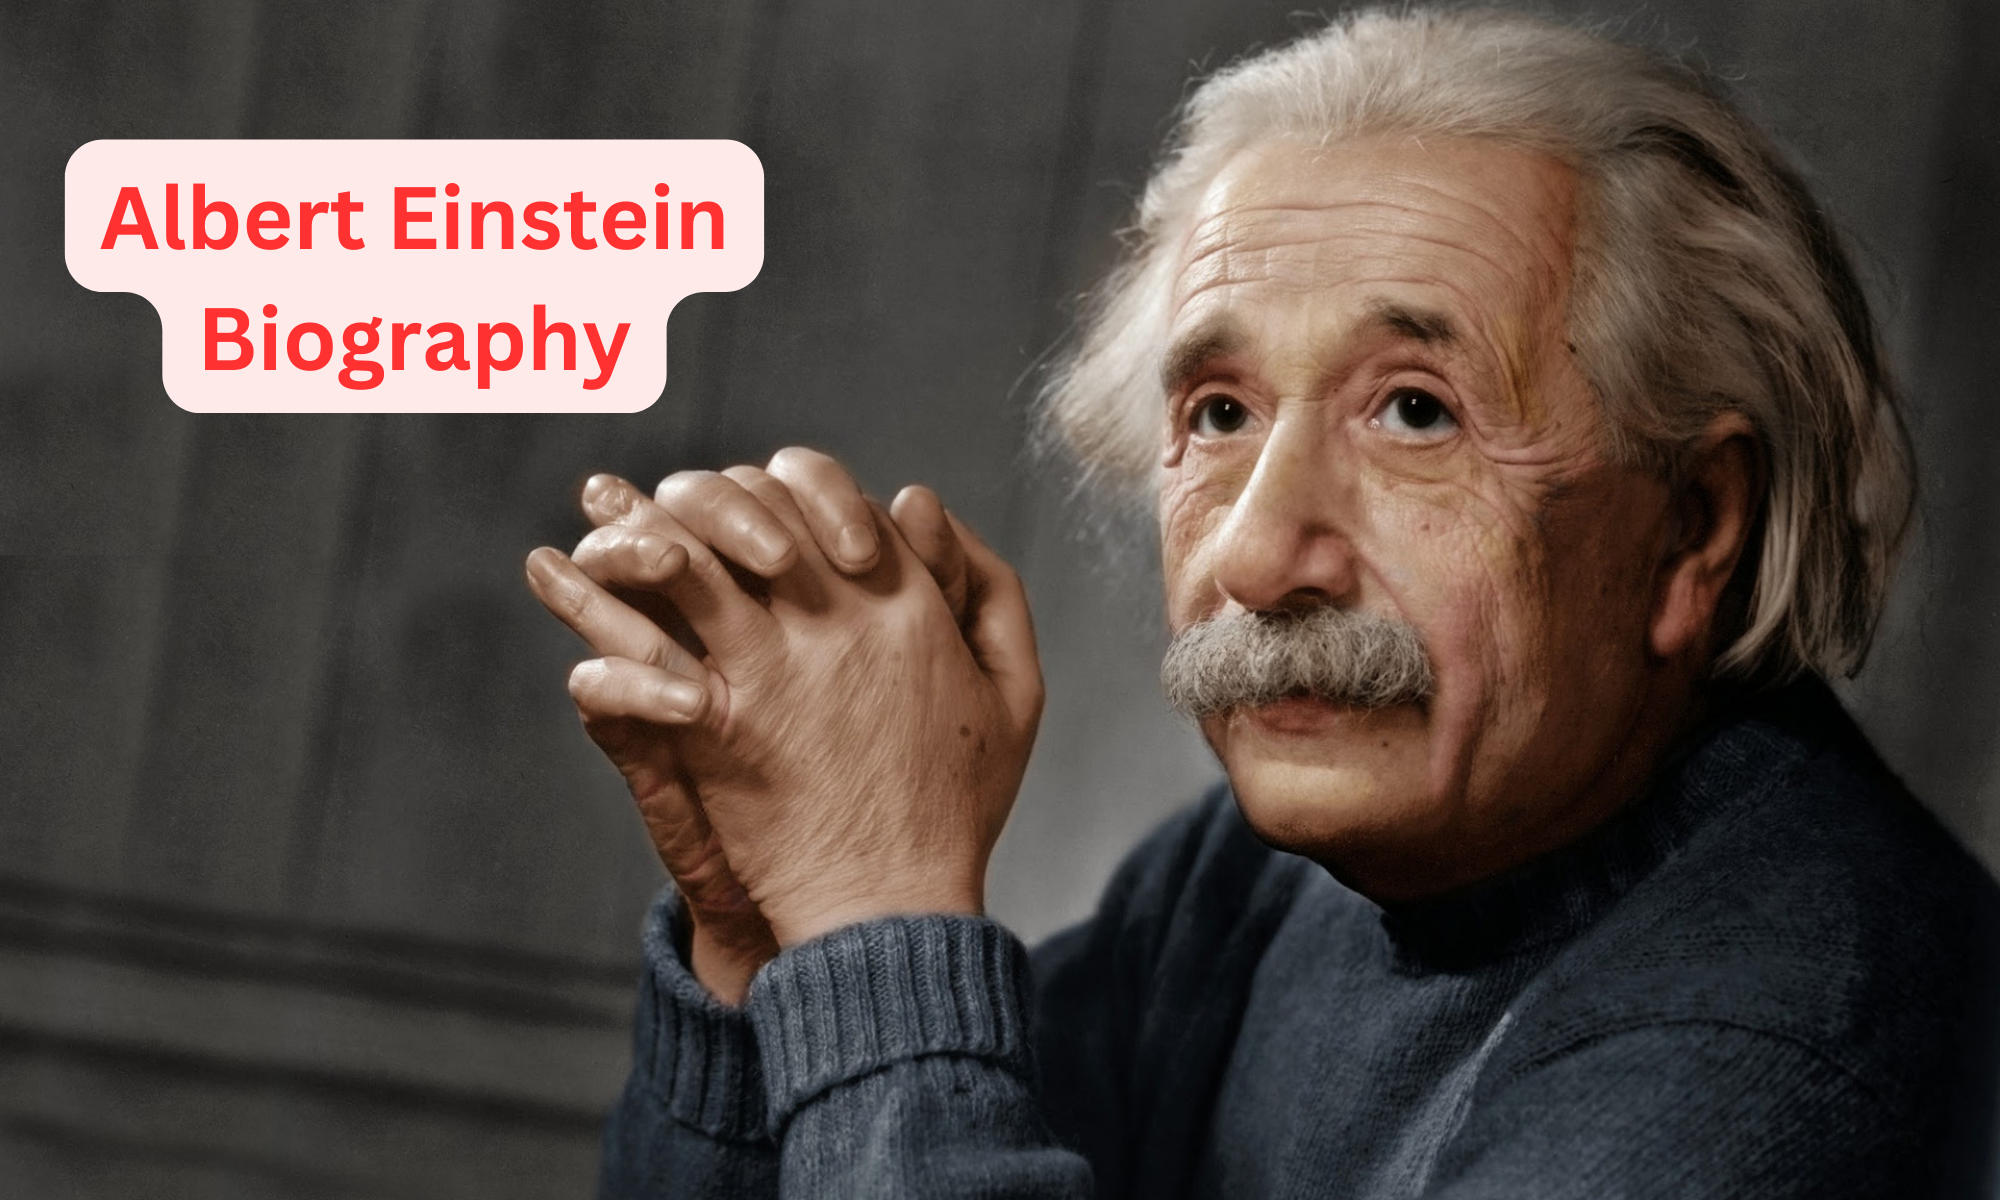 Albert Einstein Biography: Know about the father of modern physics_40.1